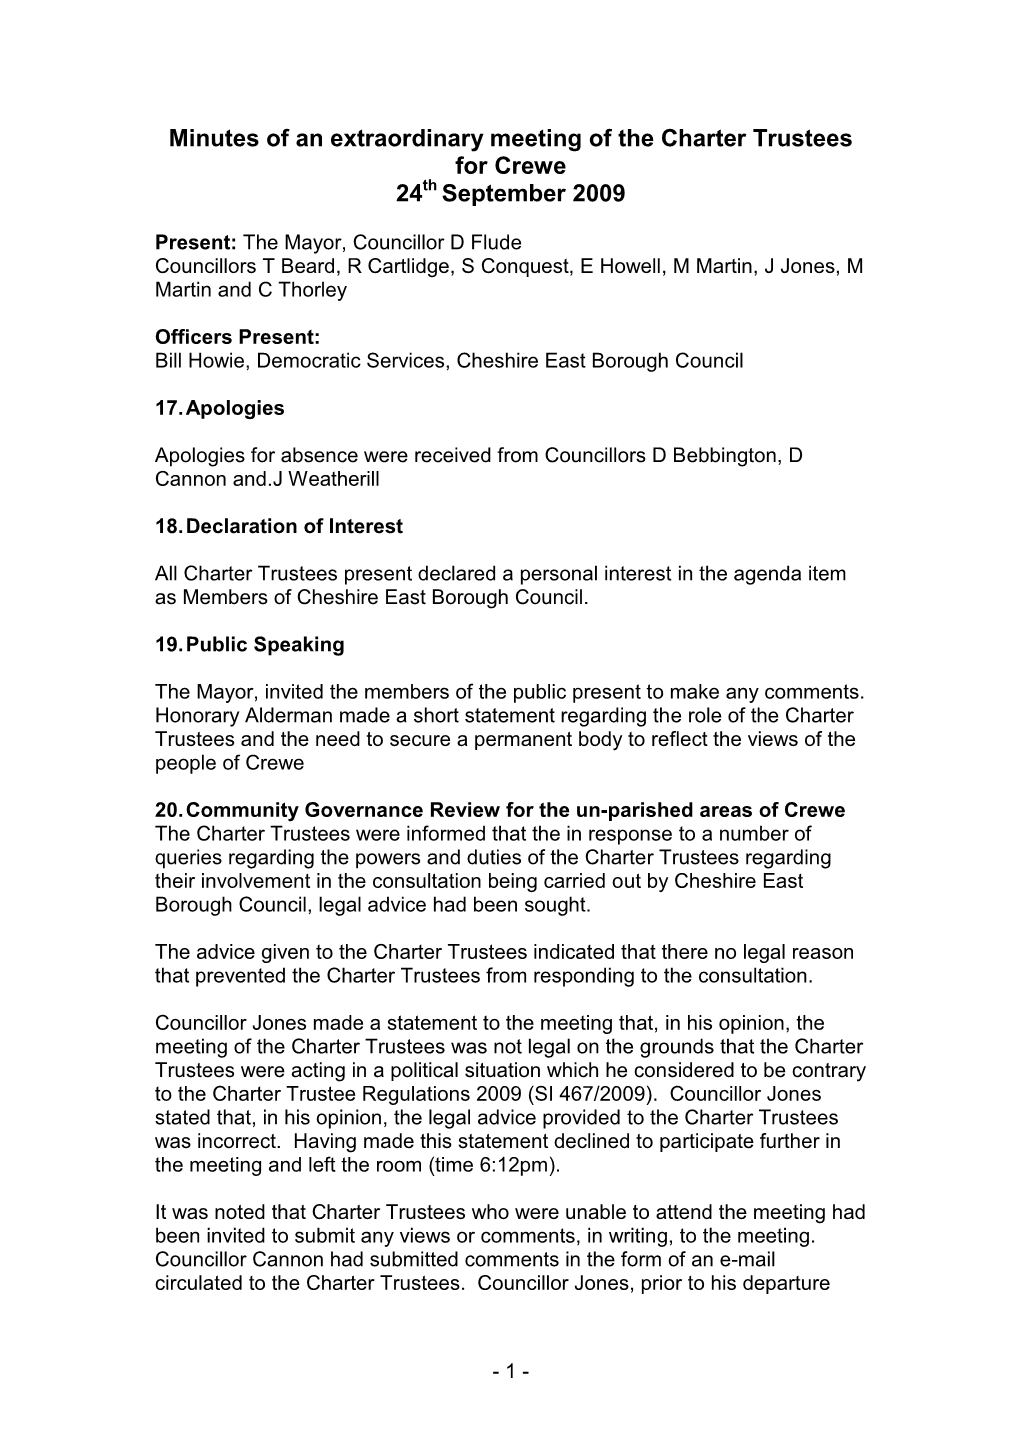 Minutes of an Extraordinary Meeting of the Charter Trustees for Crewe 24 Th September 2009